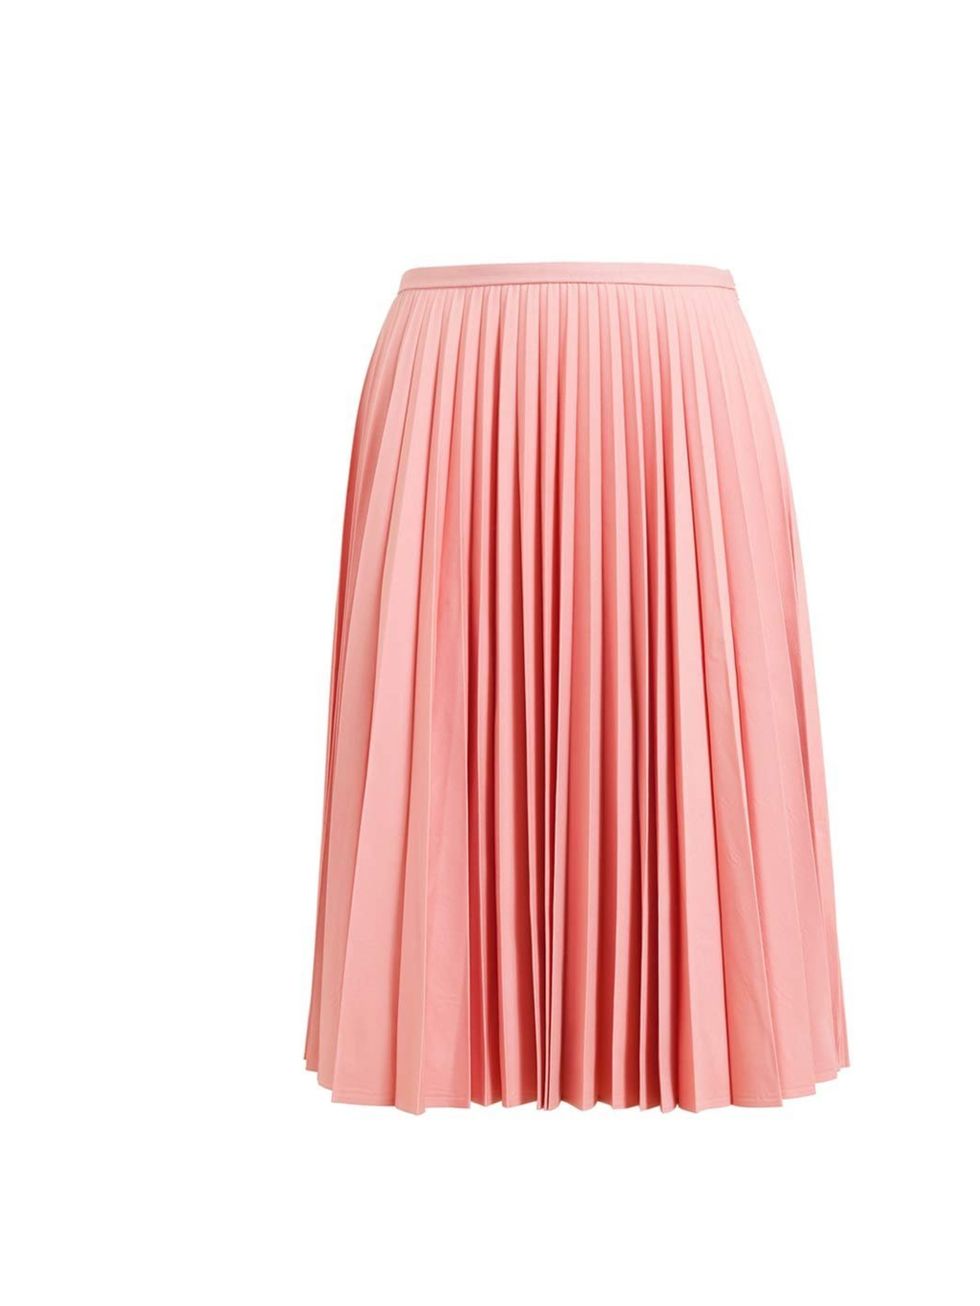 <p>Wear with a cropped knit now, and a white shirt come summer.</p><p>J.W. Anderson skirt, £495 at <a href="http://www.brownsfashion.com/product/03J120730002/107/pleated-crepe-wool-skirt">Browns</a></p>